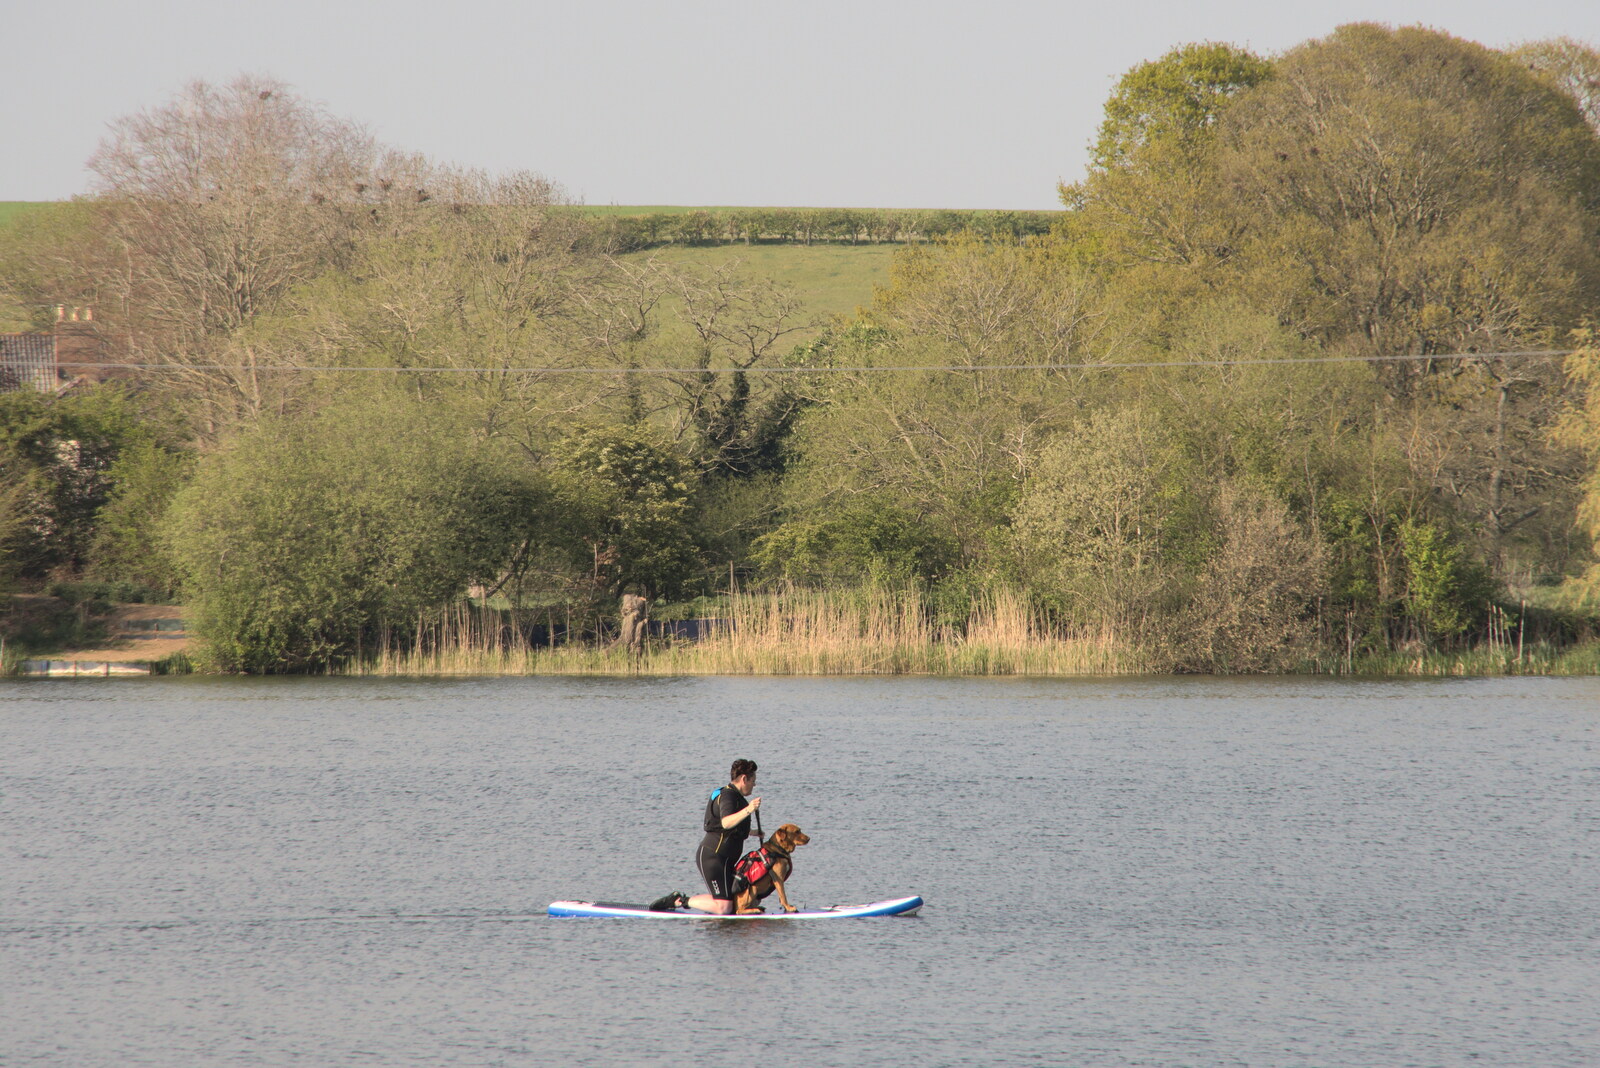 The Canoe's First Outing, Weybread Lake, Harleston - 1st May 2022: A dog goes out on a paddle board